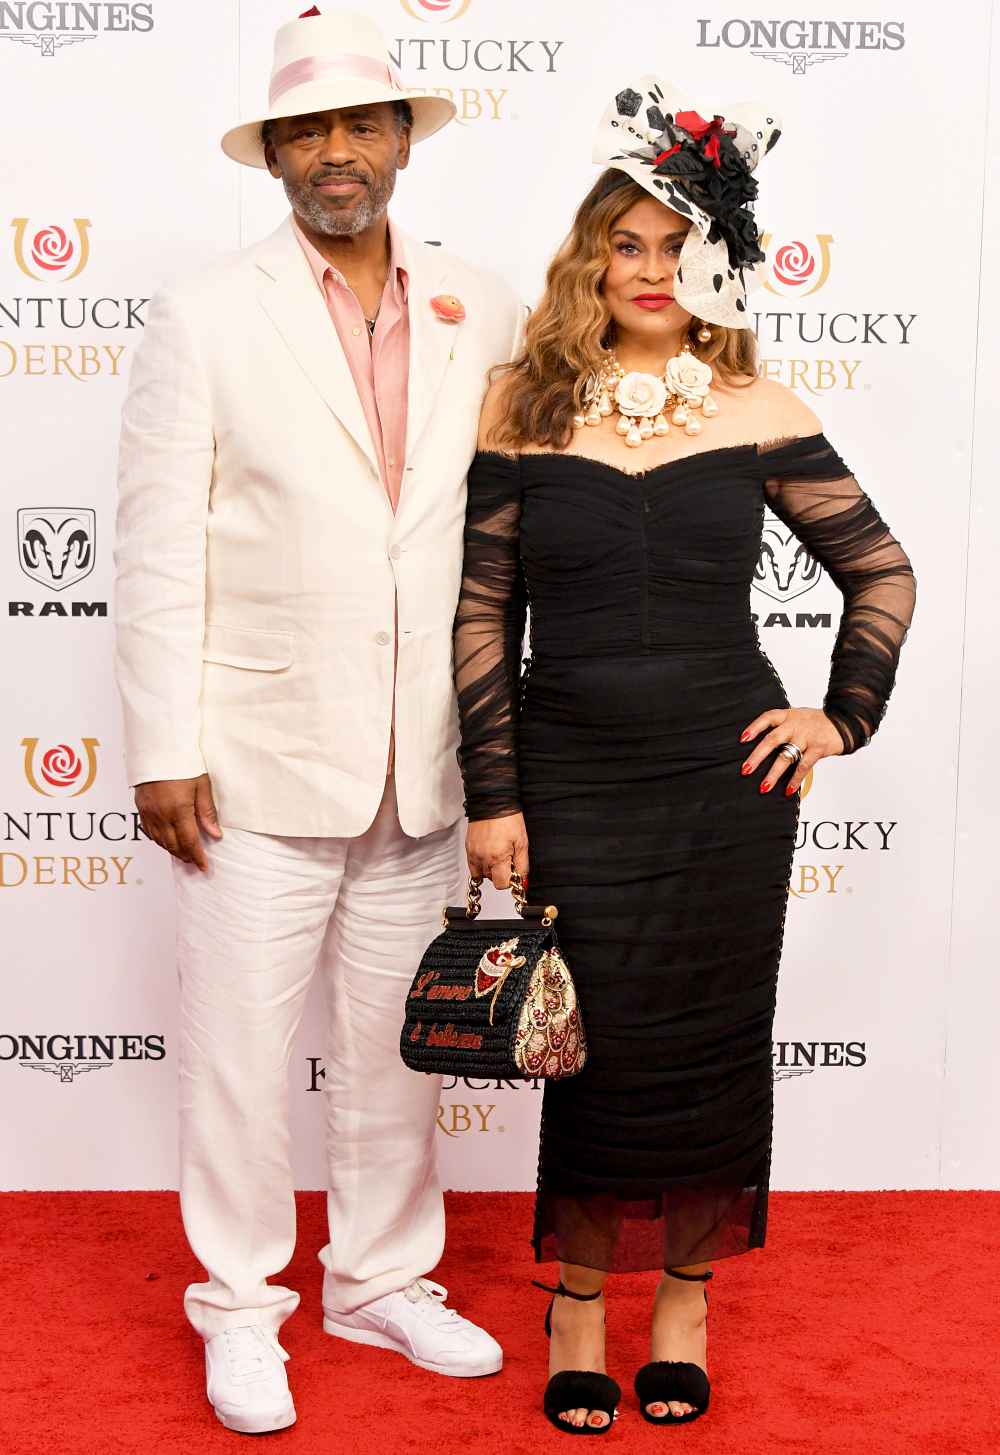 Tina and Richard Lawson attend Kentucky Derby 144 on May 5, 2018 in Louisville, Kentucky.